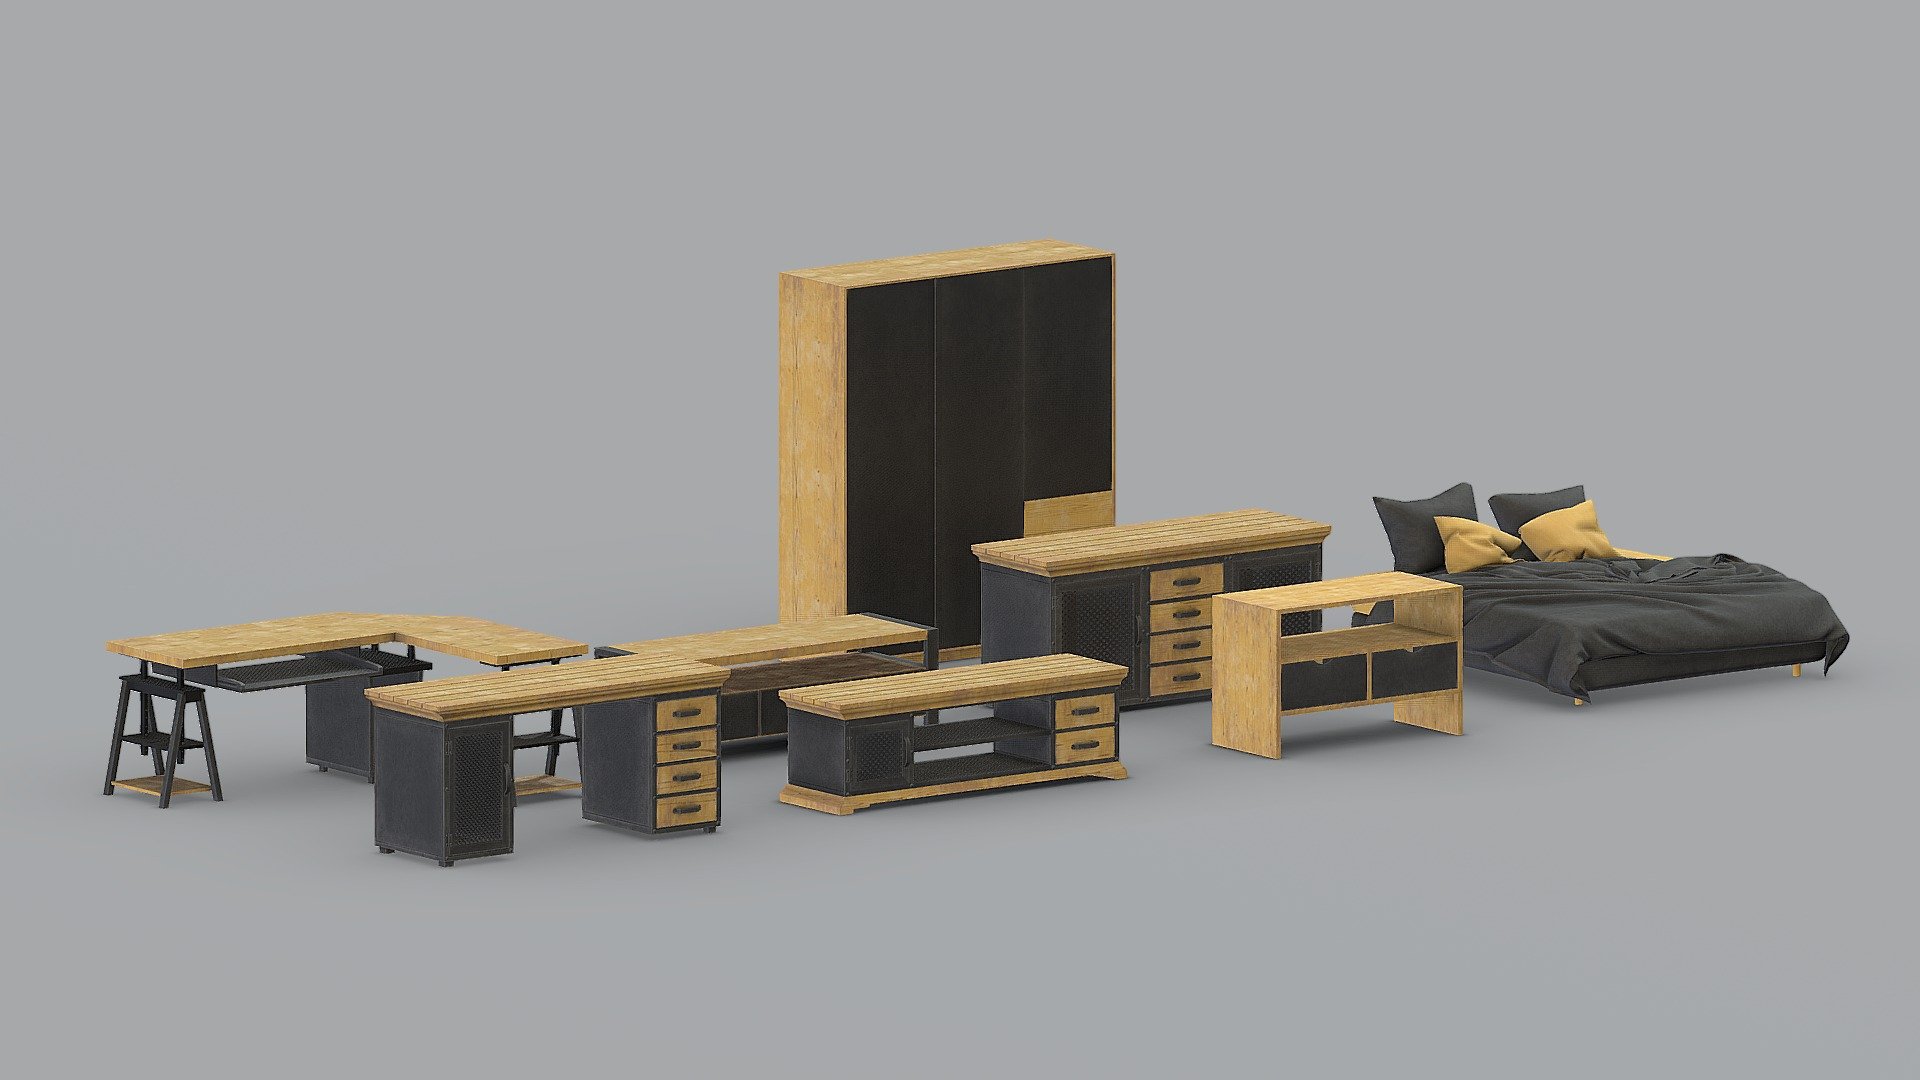 -%50 Promo

**Game Ready **

Furniture for Home Work fine on Unreal and Unity
**Low poly and textured **

( Textures are compress on the Sketchfab's viewport )
Enjoy


[ IMPORTANT ]
In Unreal Engine -
    Set all material's Blend Node to Masked.
Then Connect Base Color &ldquo;A